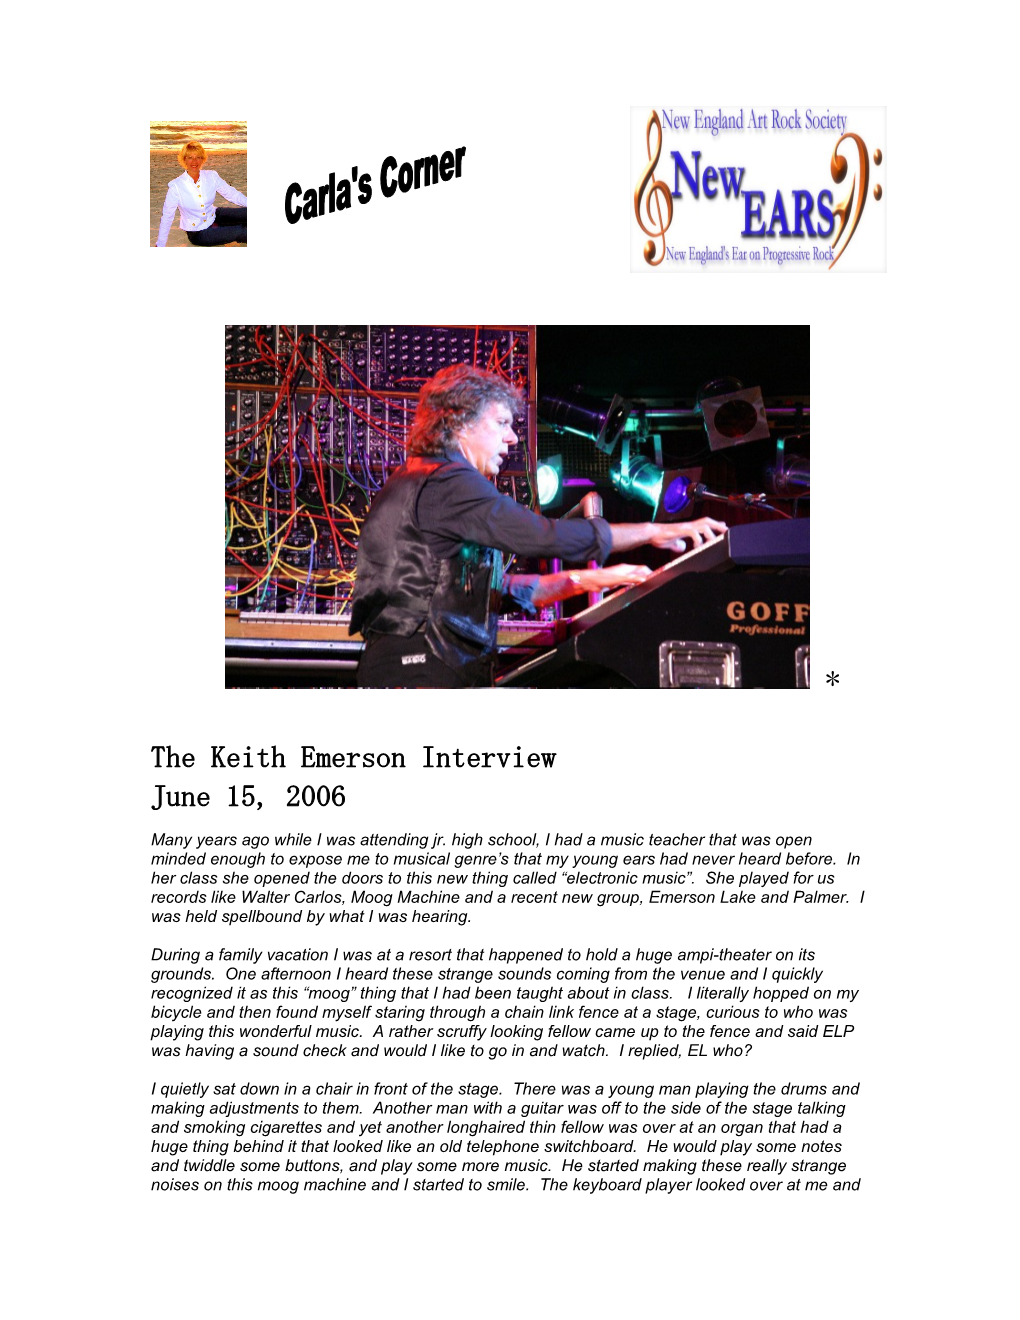 The Keith Emerson Interview